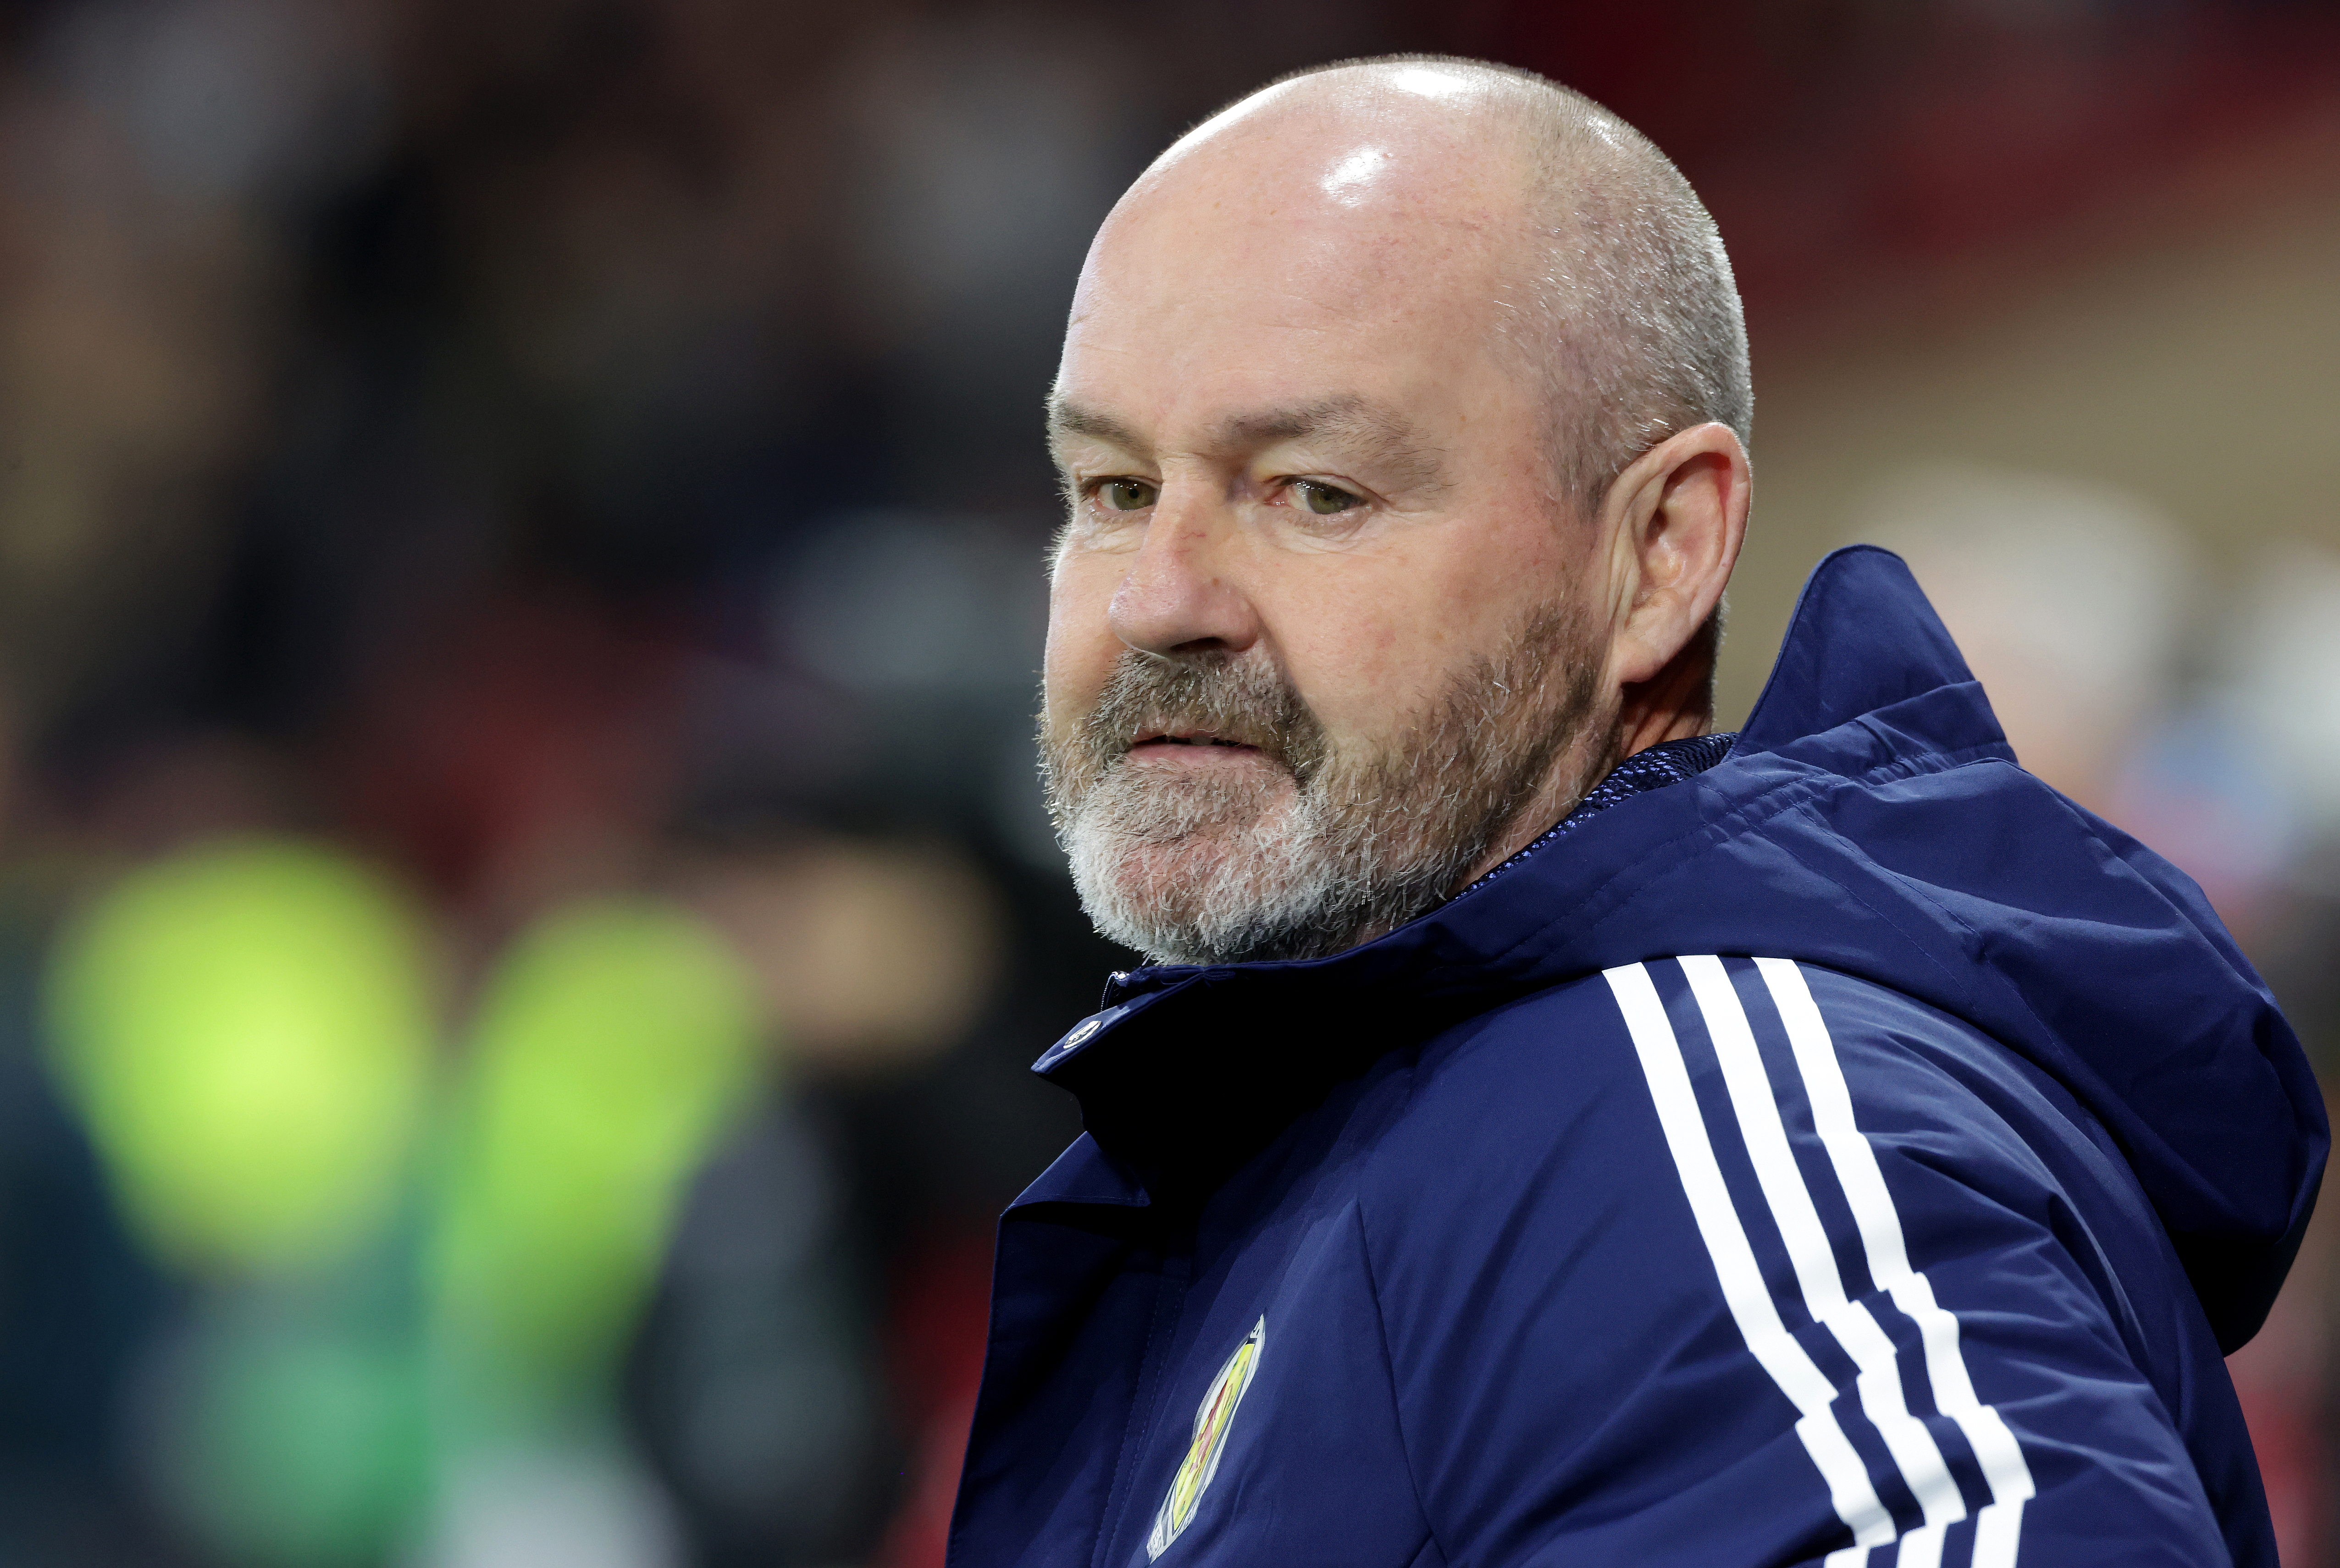 Scotland manager Steve Clarke will aim to lead the country beyond the first round of a major finals for the first time